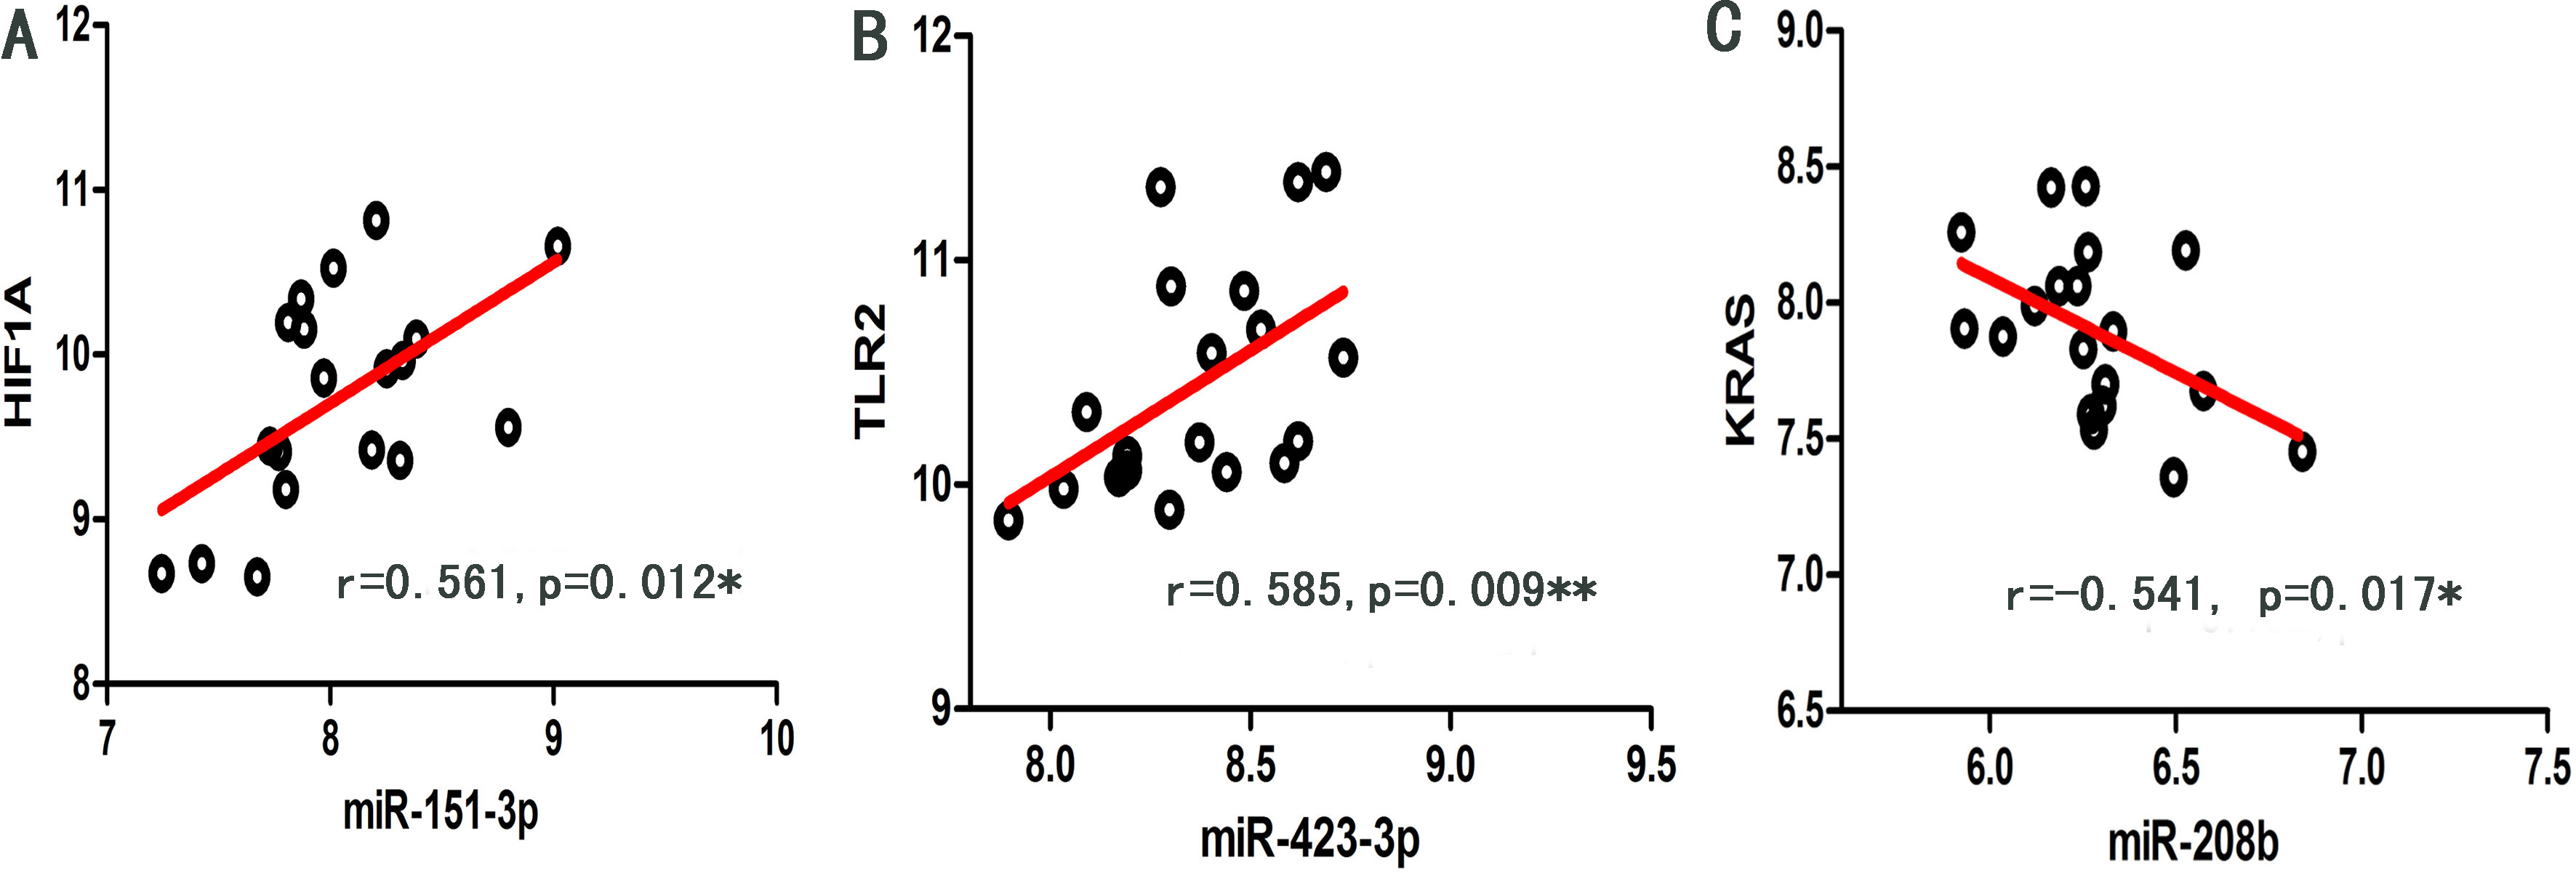 Scatter dot plots of significant regulation (P*< 0.05 and P**< 0.01) between miRNAs and mRNAs: (A) miR-151-3p and HIF1A; (B) miR-423-3p and TLR2; (C) miR-208b and KRAS. The r and p values indicate the Spearman correlation coefficients and their significance respectively.